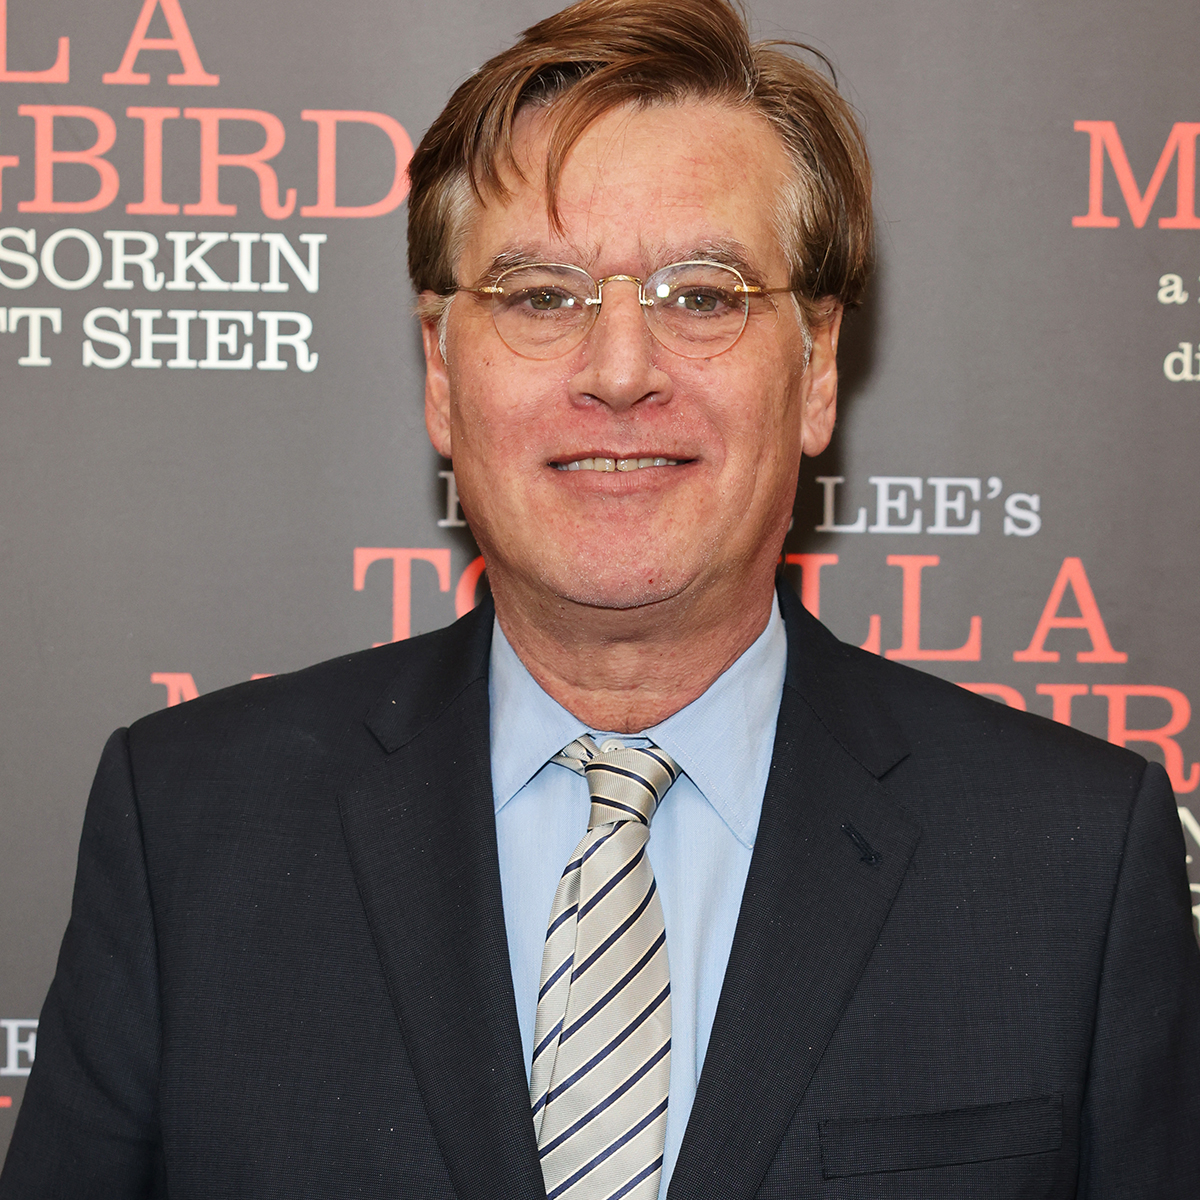 The West Wing S Aaron Sorkin Shares He Suffered Stroke Wirefan Your Source For Social News